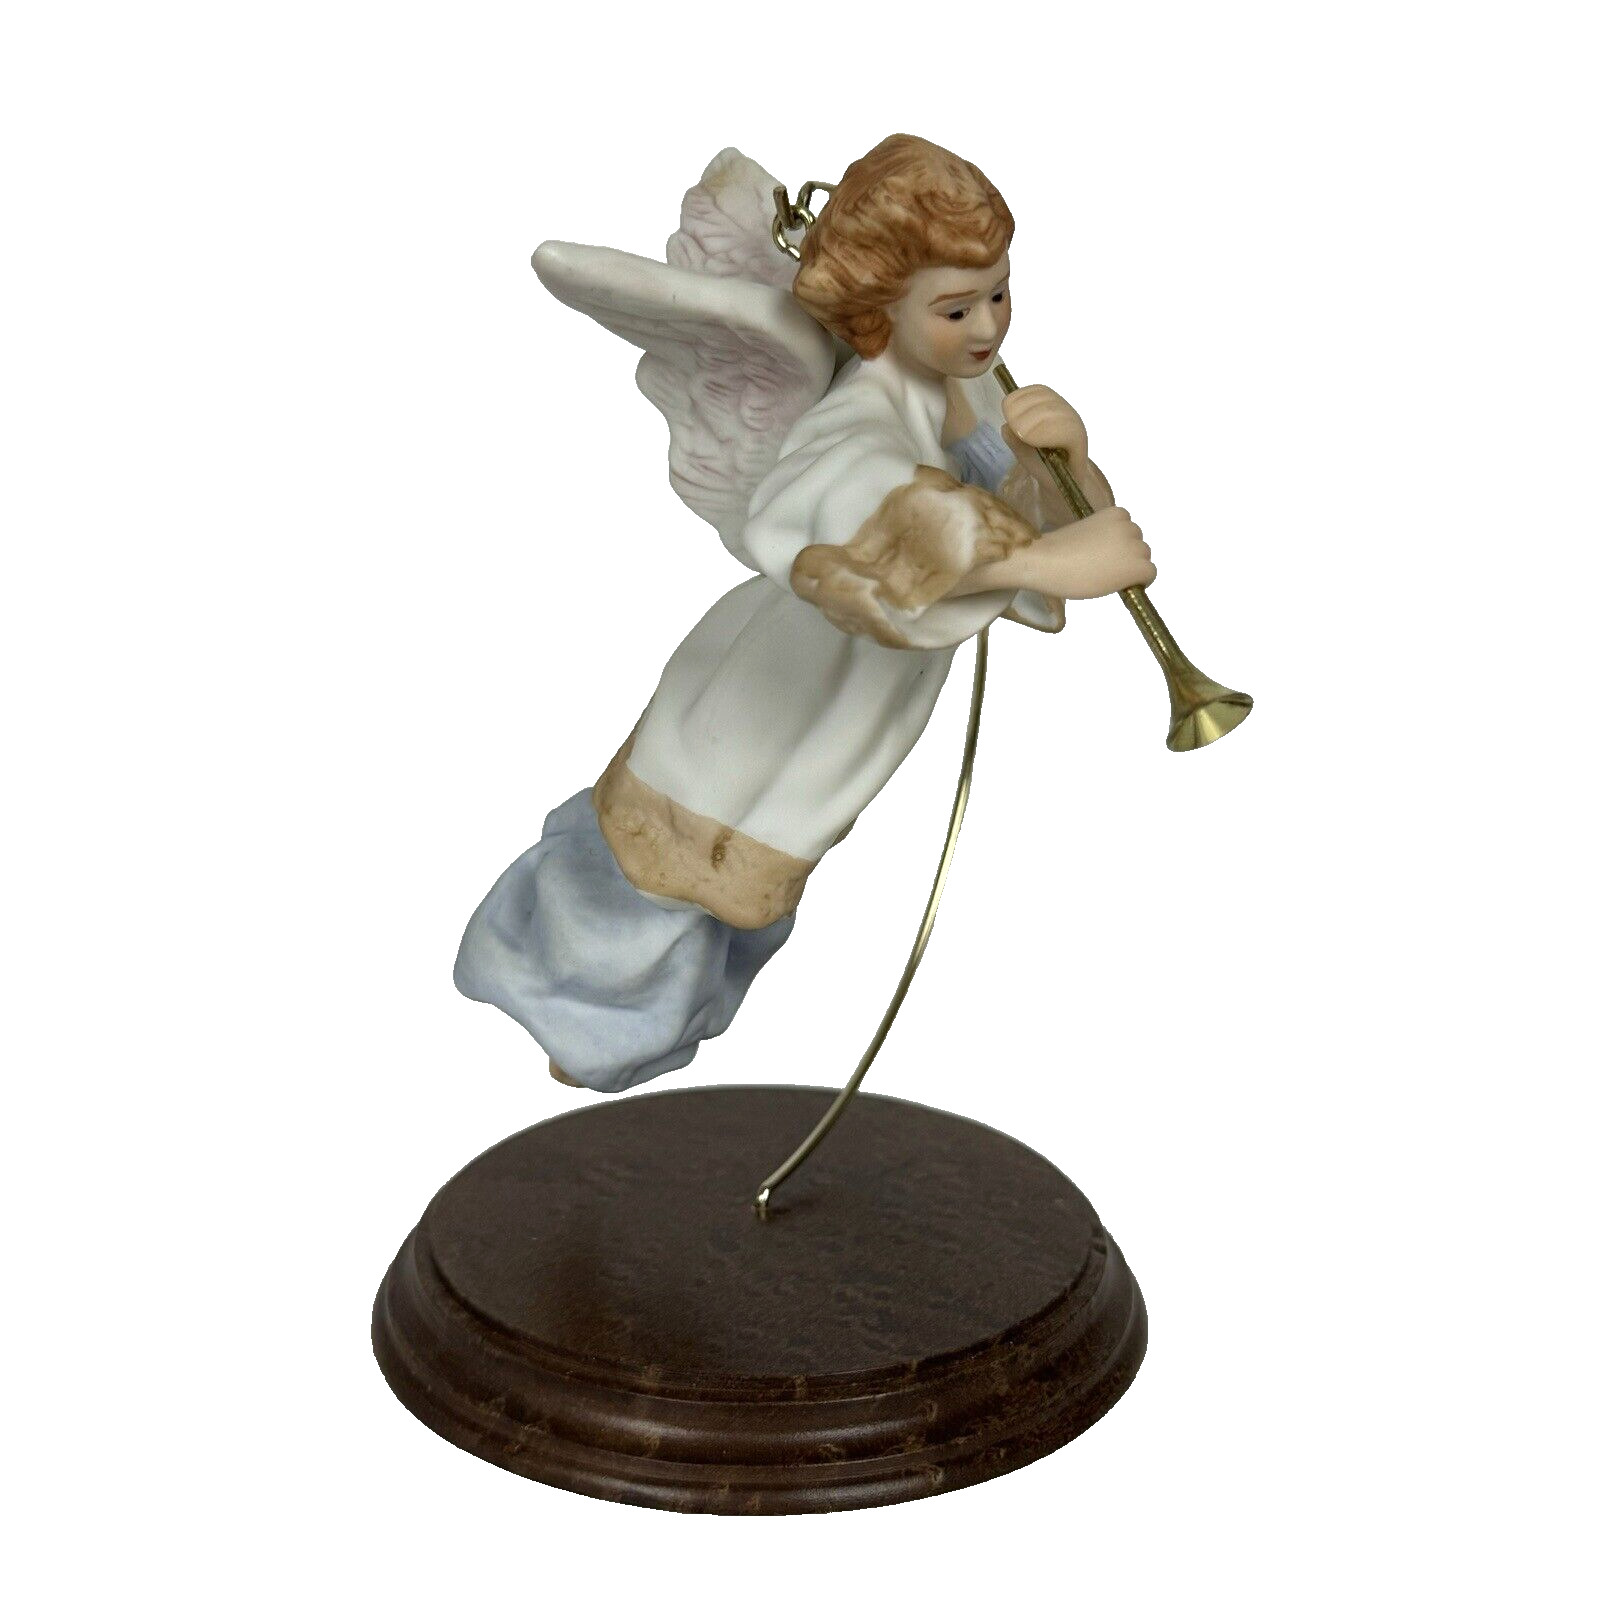 Hallmark 1985 Limited Edition Heavenly Trumpeter Angel Porcelain Ornament Stand